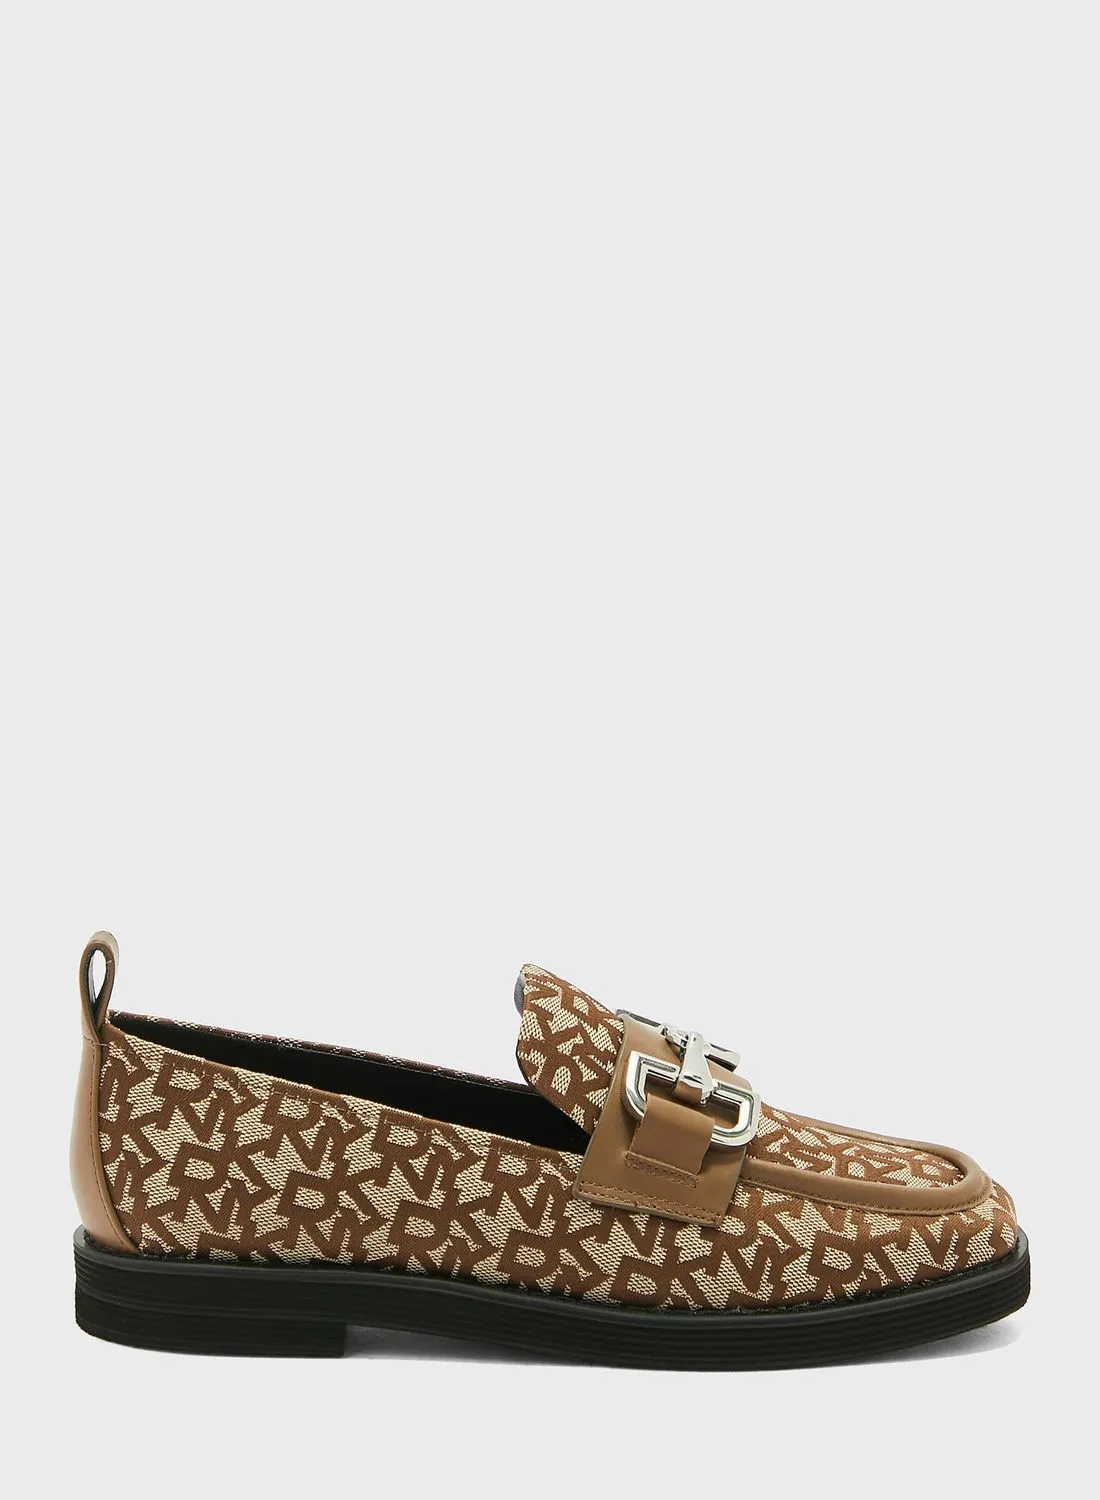 DKNY Kylan Loafers Shoes